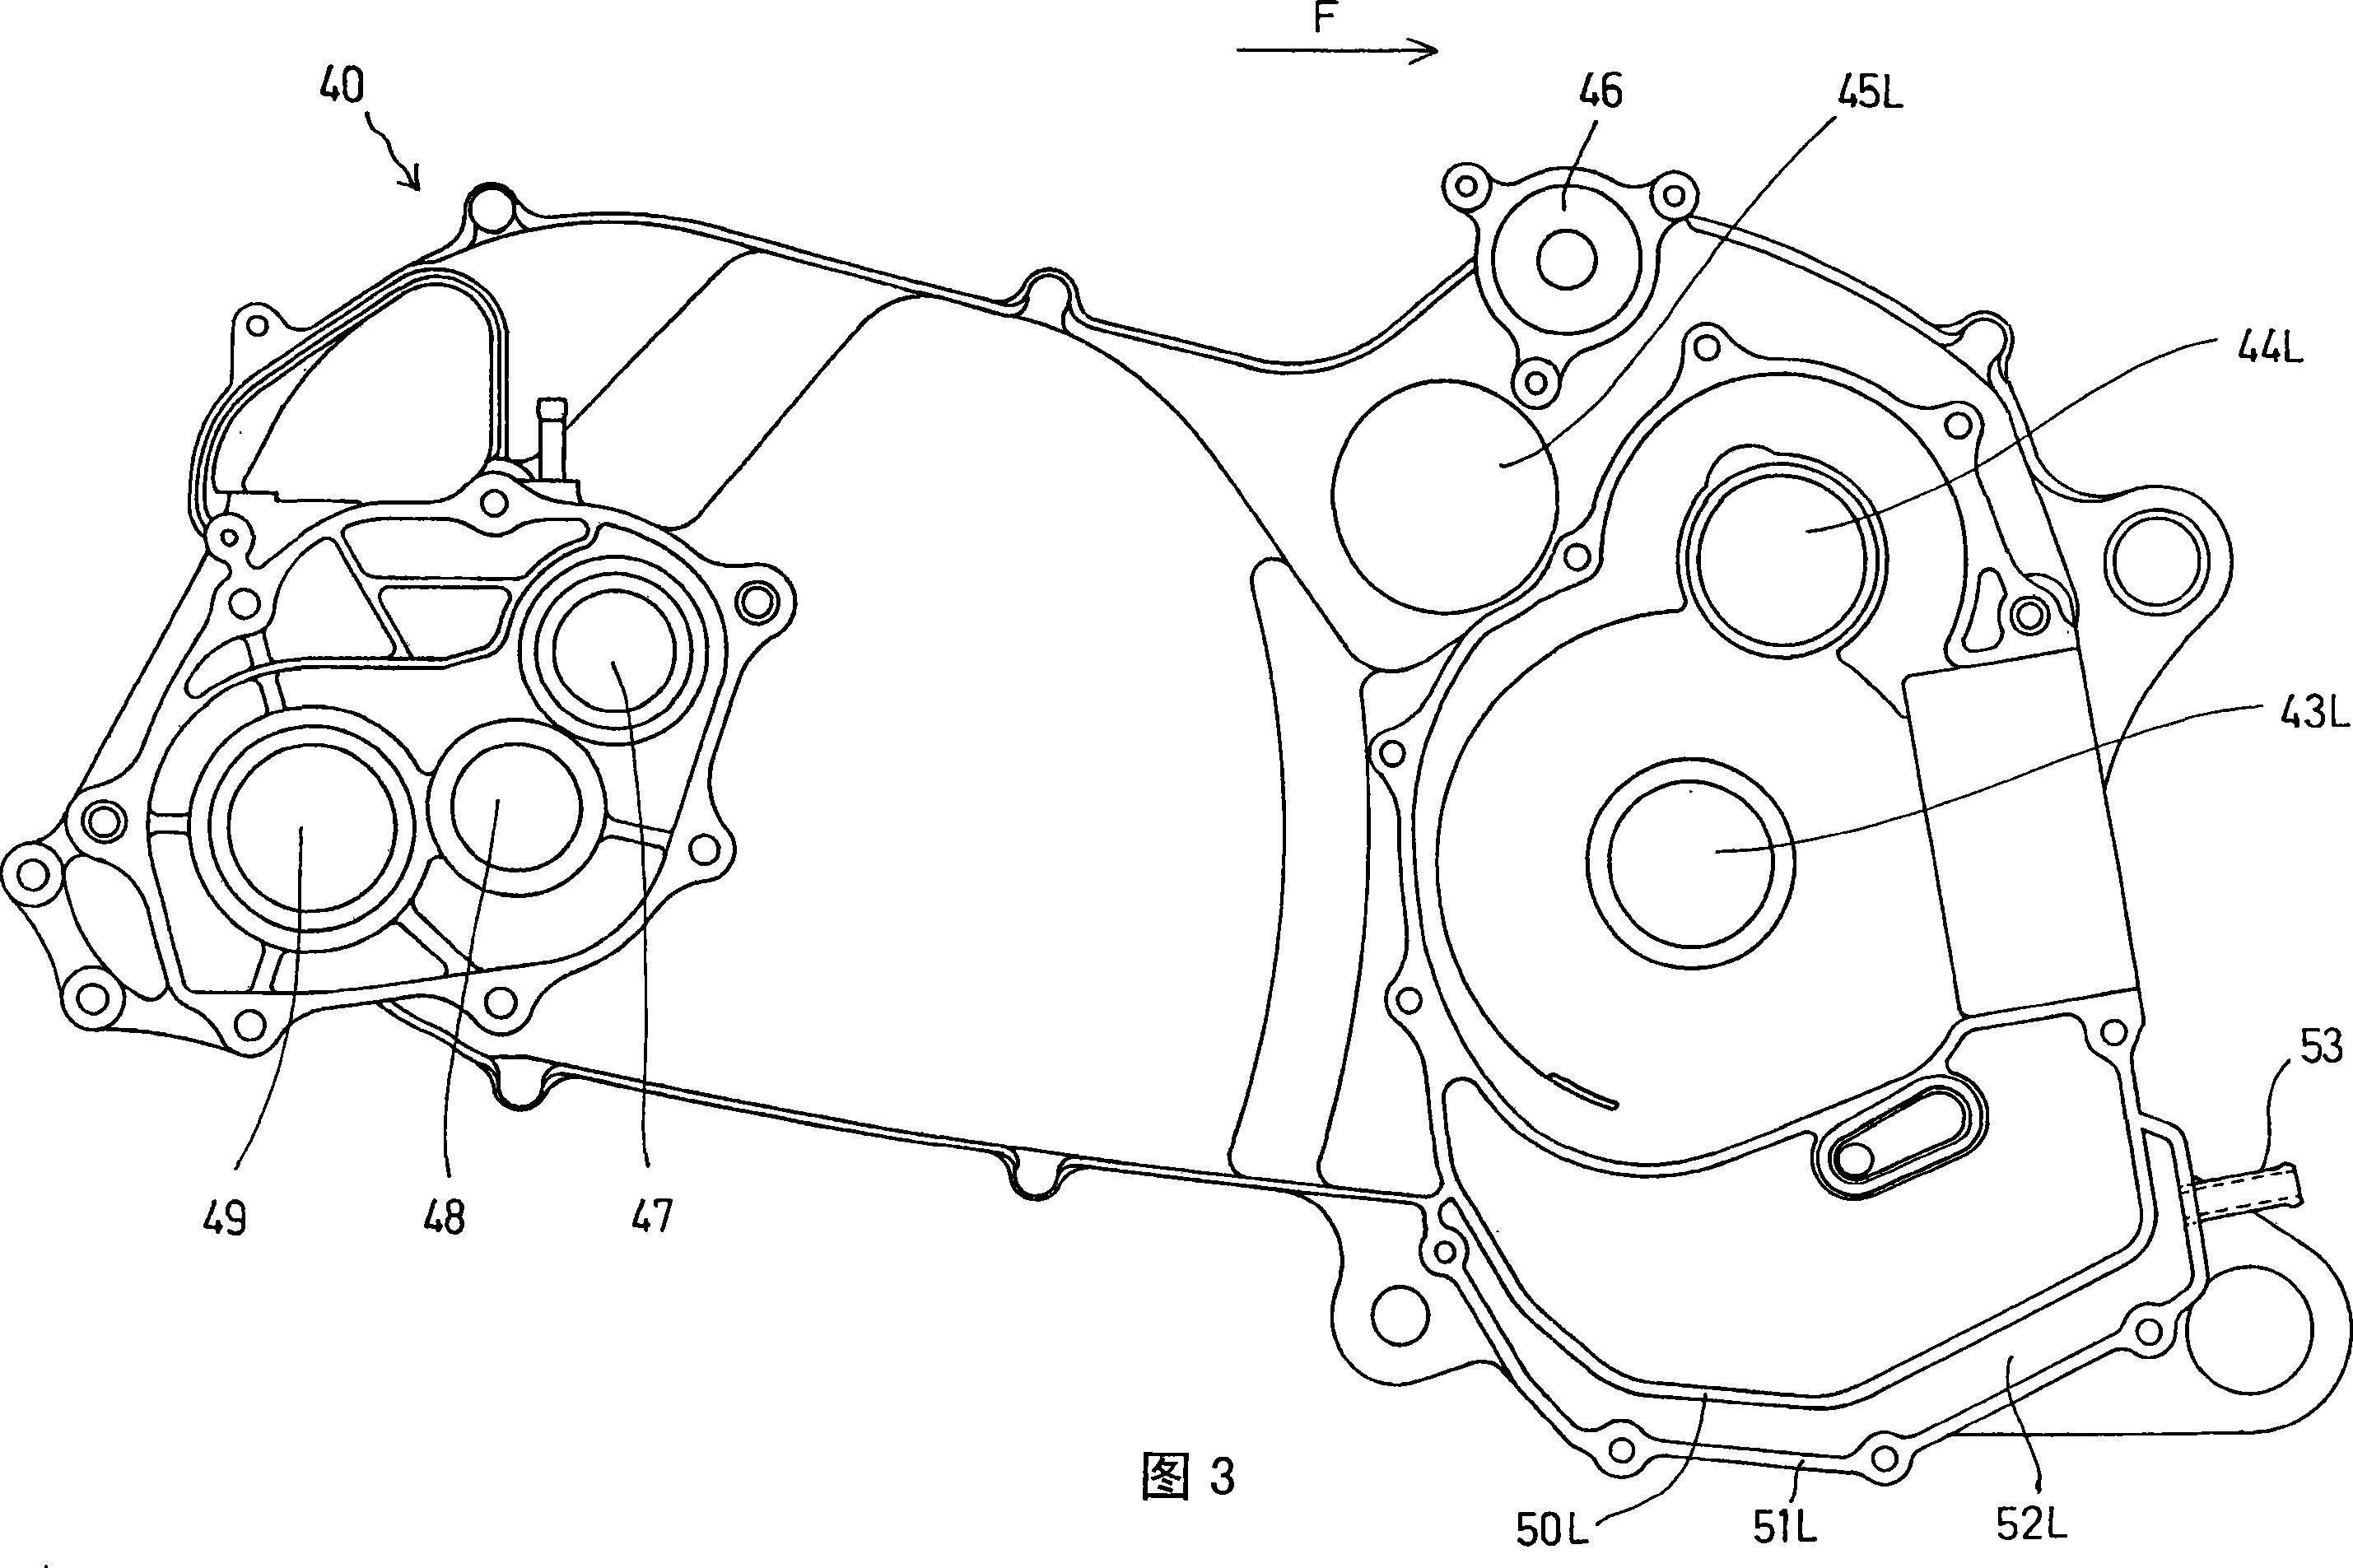 Crankcase of internal combustion engine